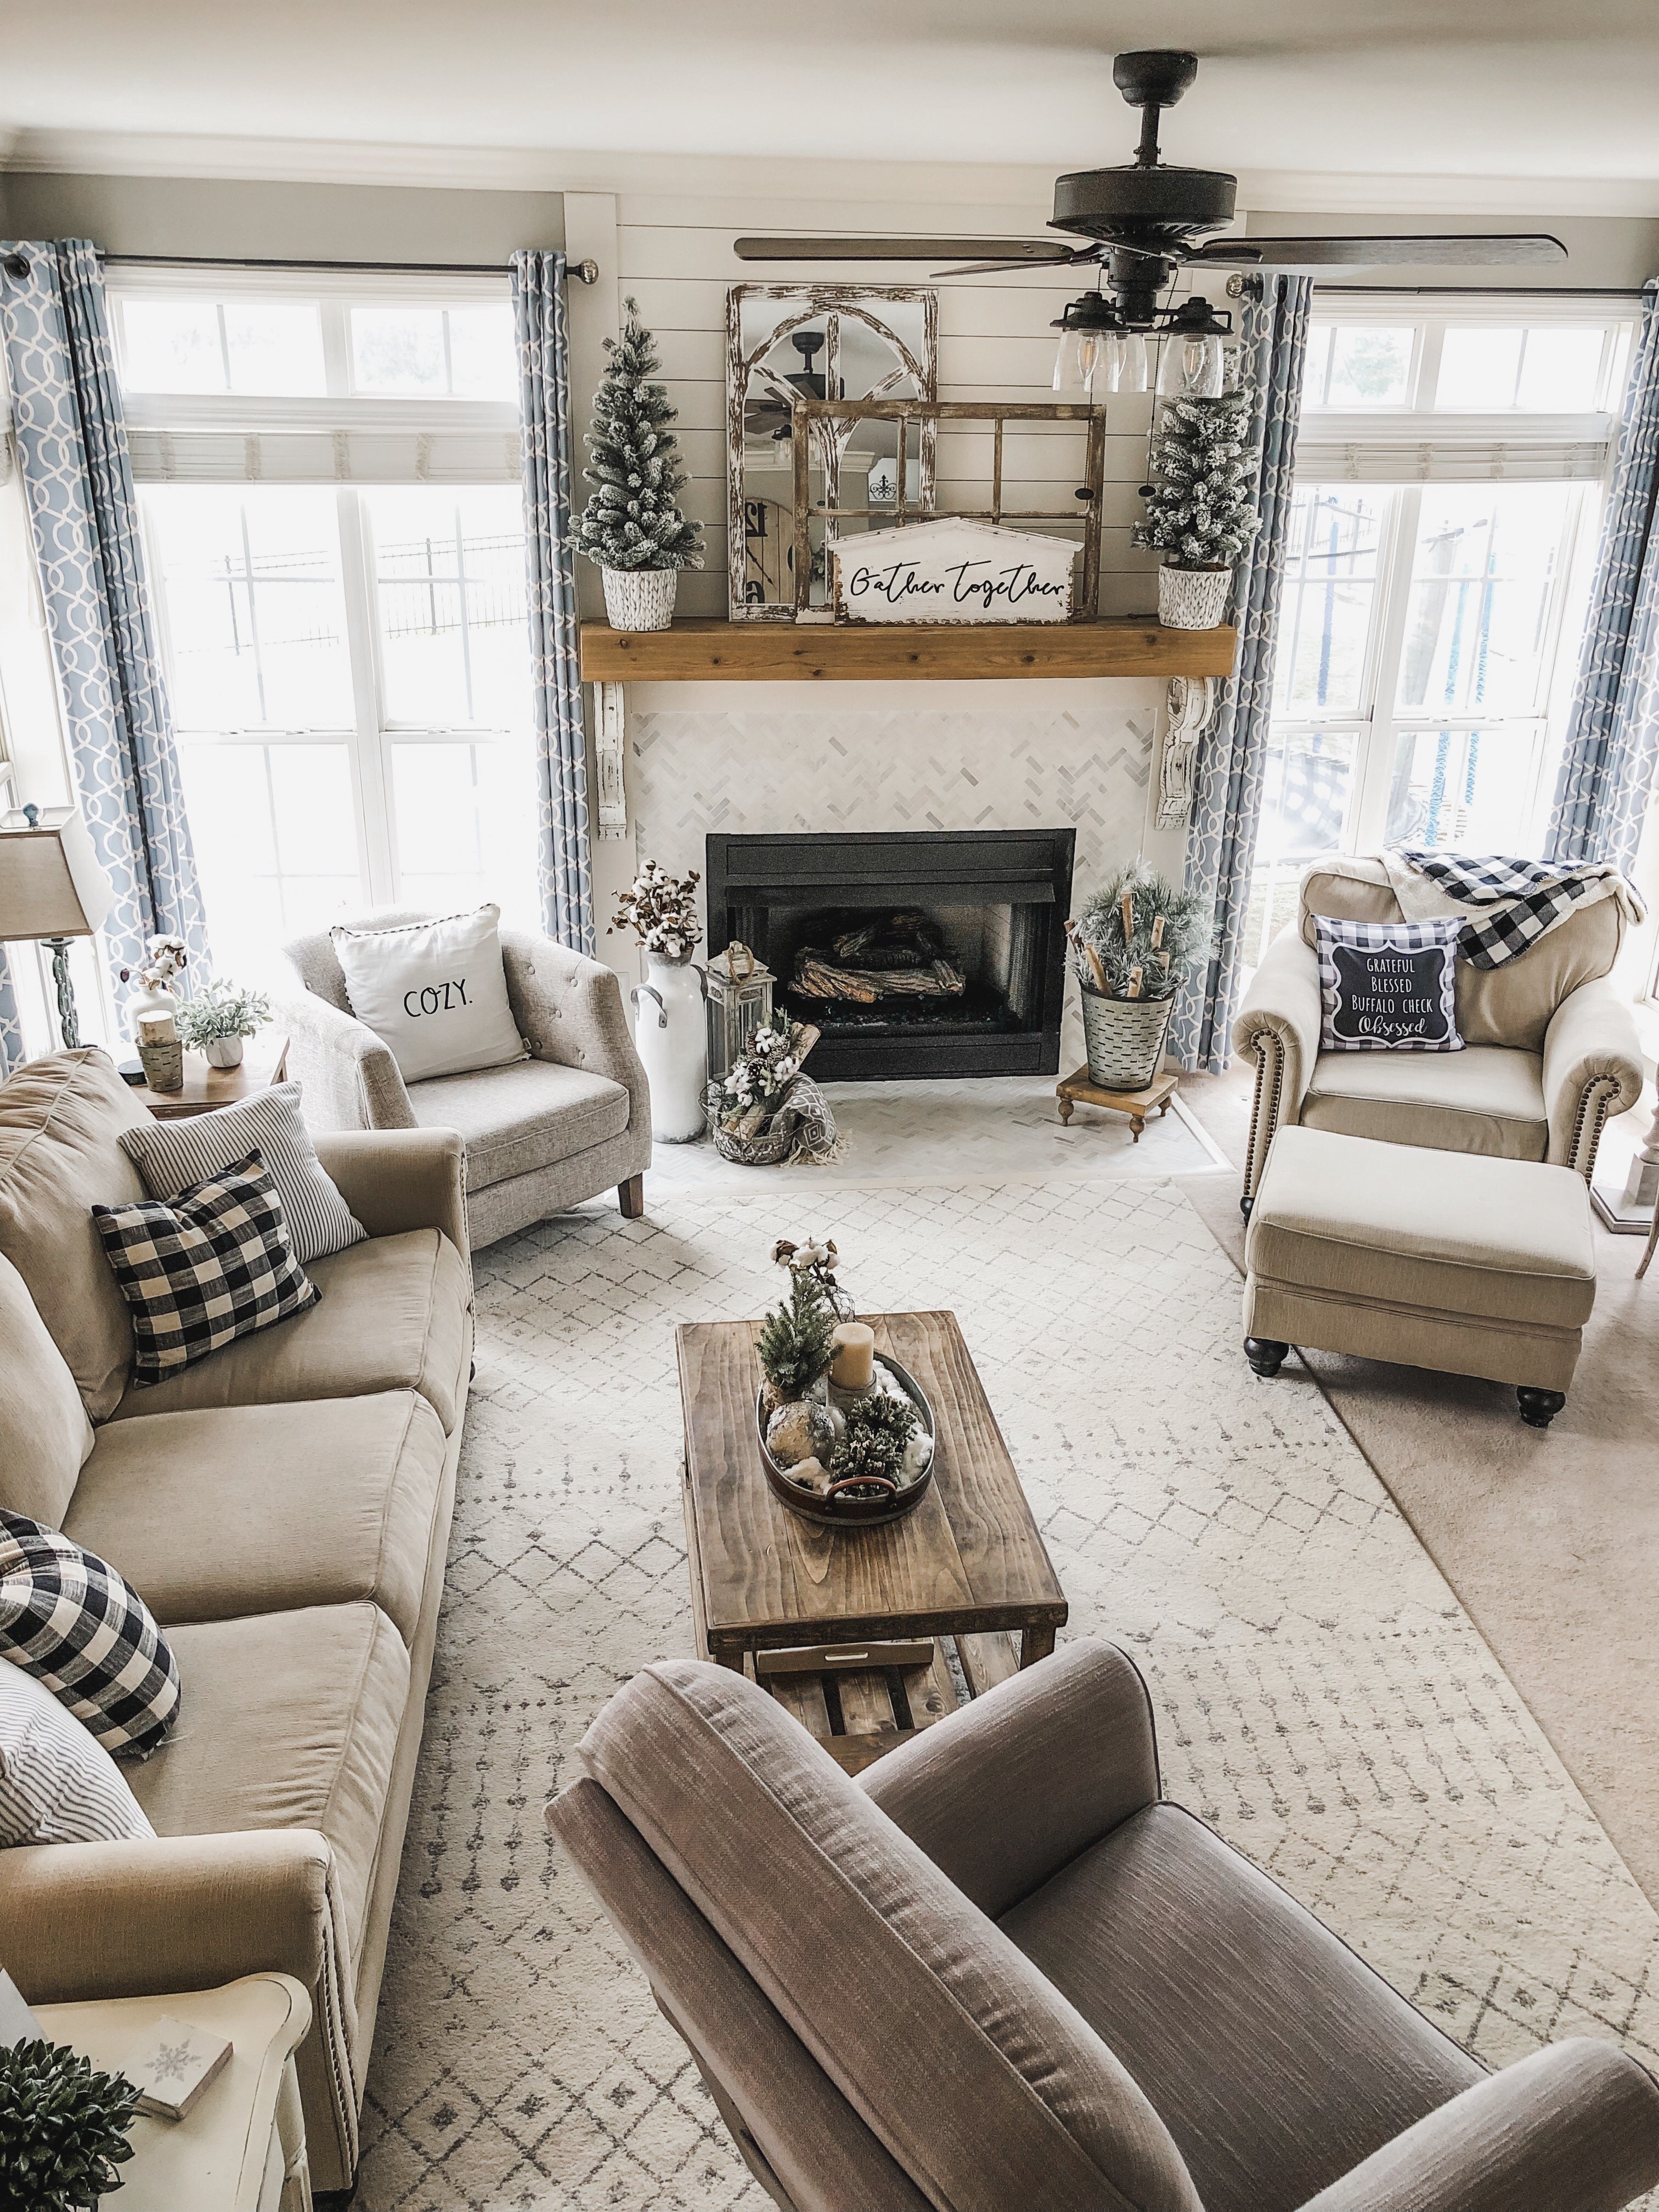 Cozy Winter Living Room decor with flocked greenery, birch logs and